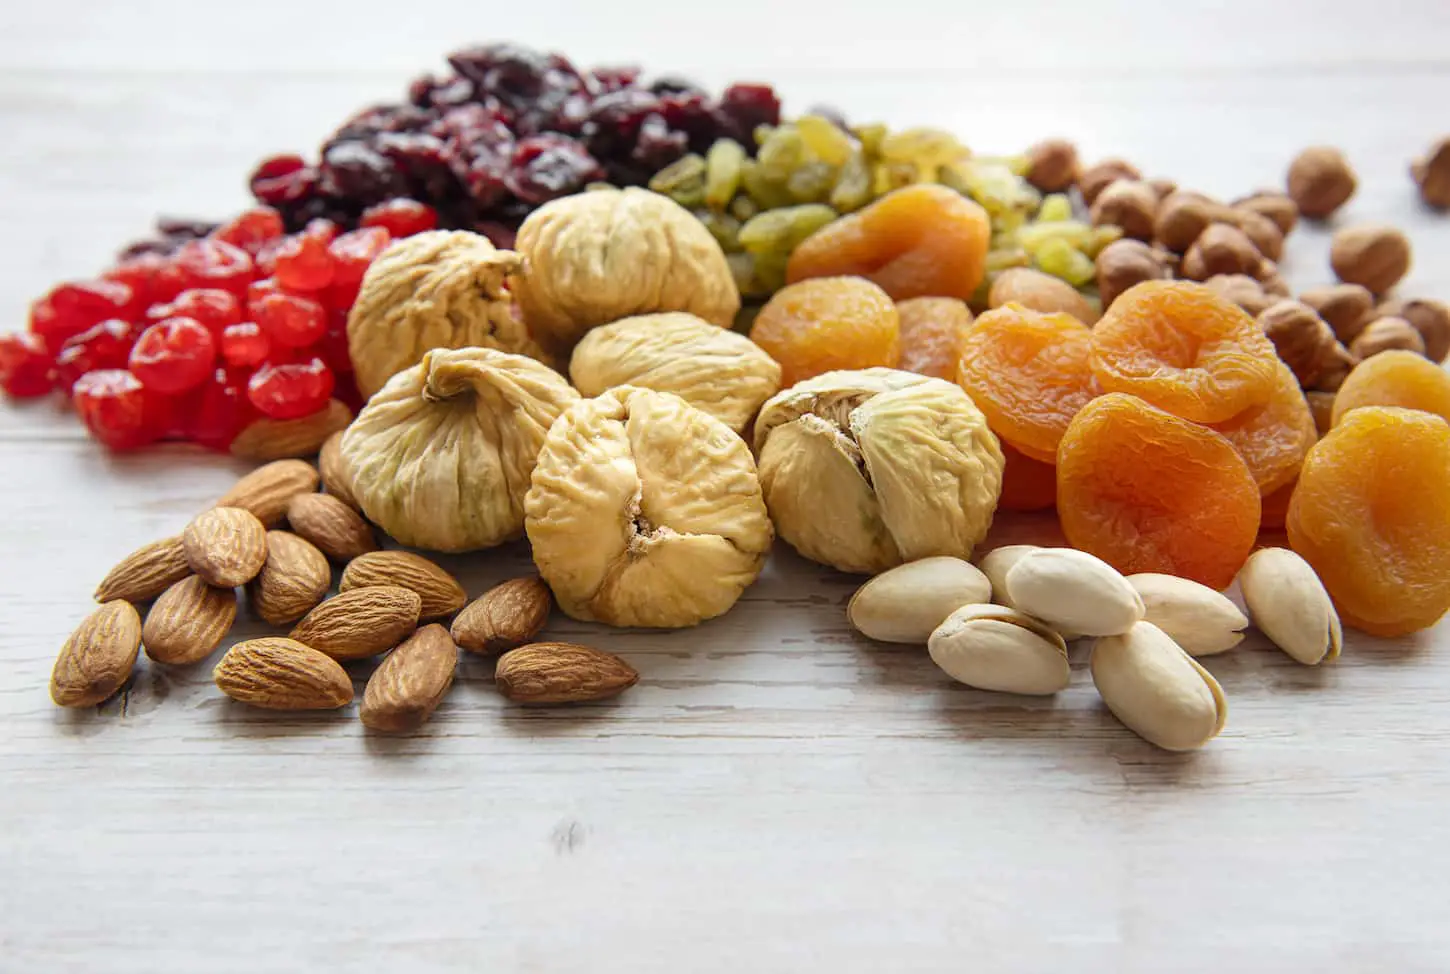 An image of Various dried fruits and nuts on a wooden background.